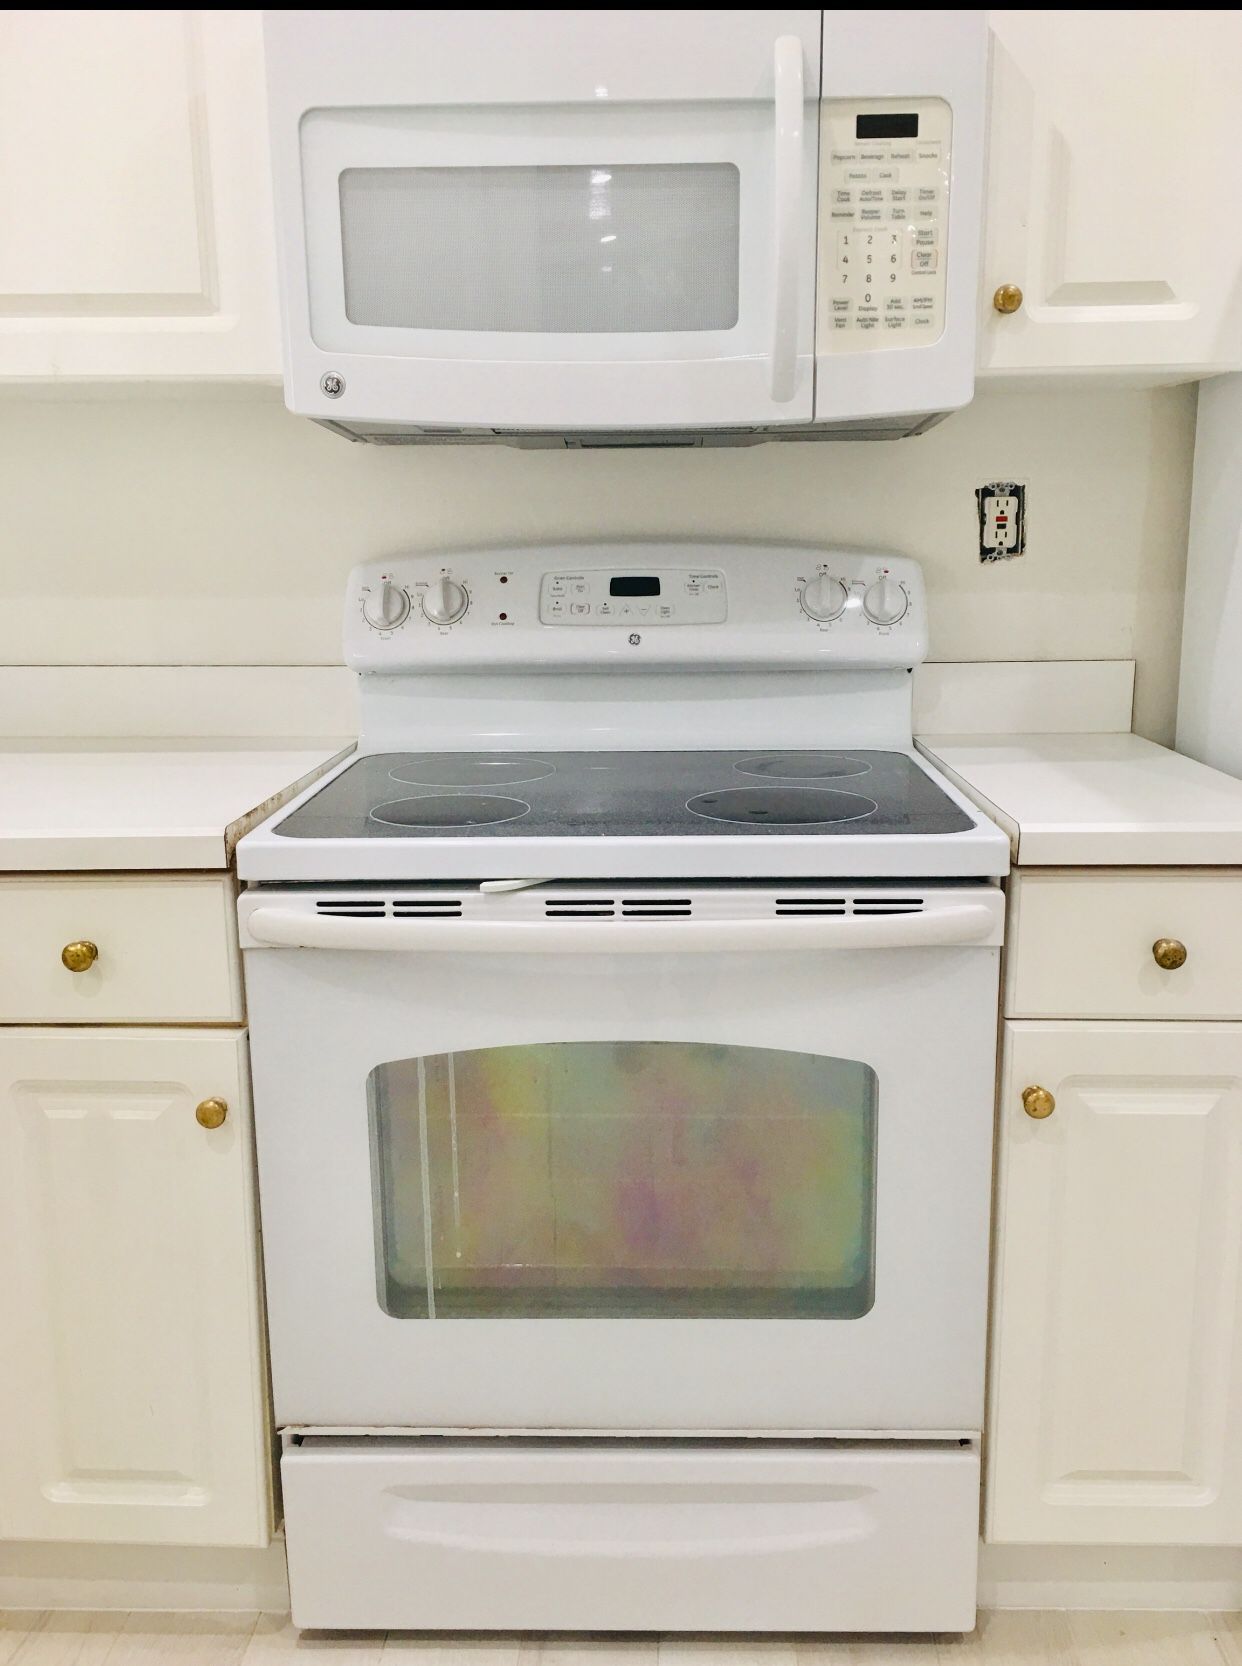 GE electric stove and microwave